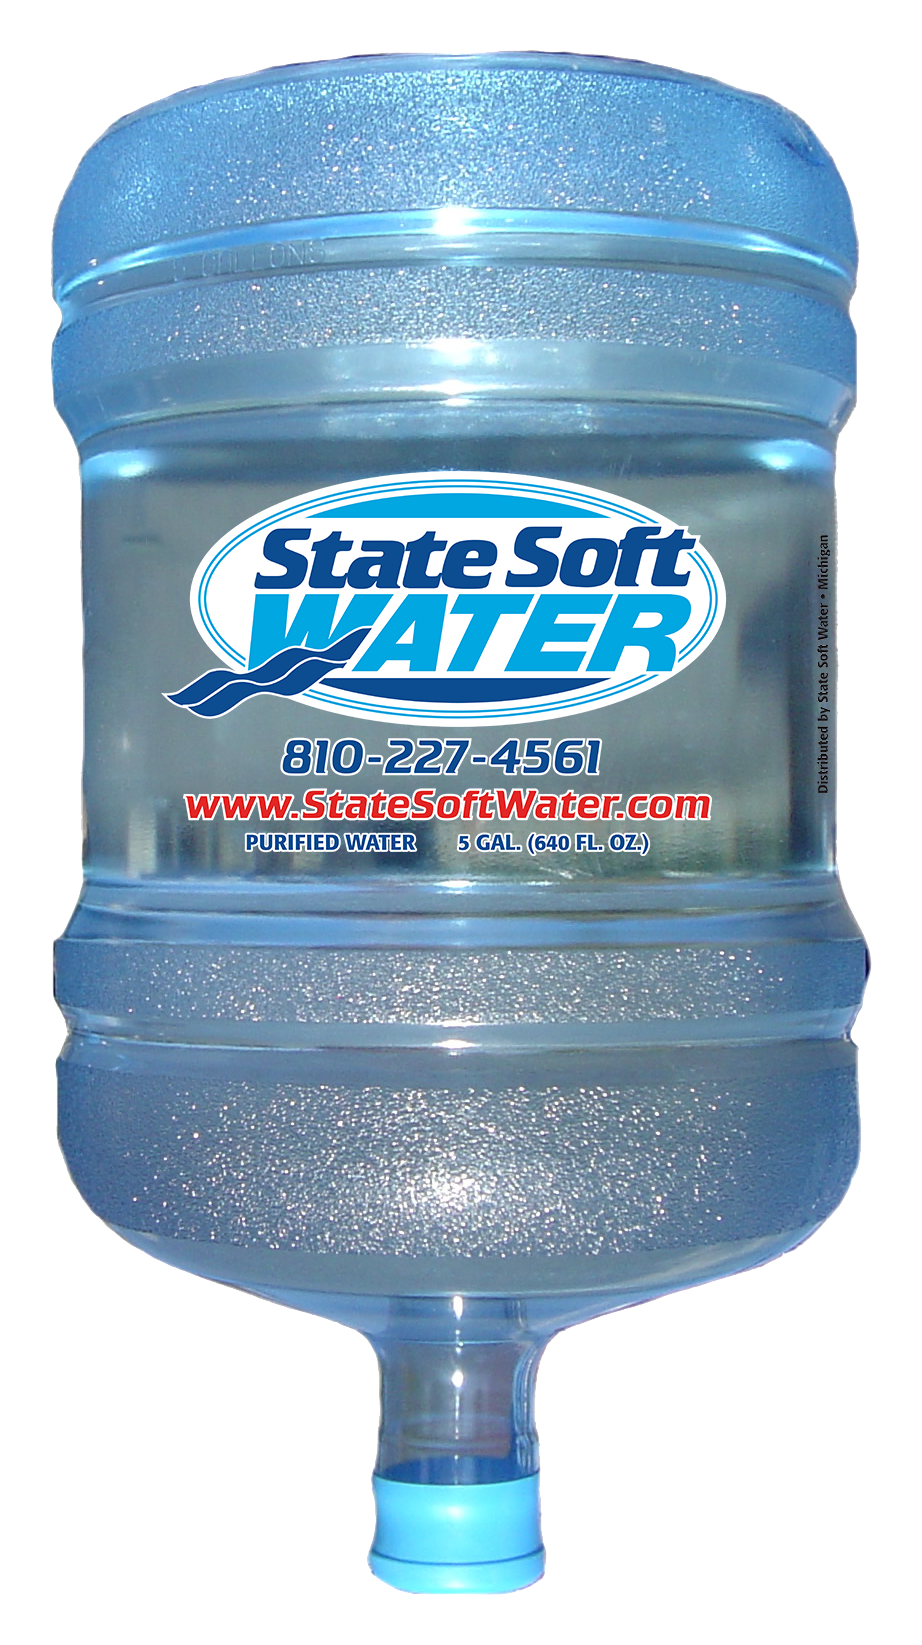 https://statesoftwater.com/wp-content/uploads/5-gallon-state-soft-water.png